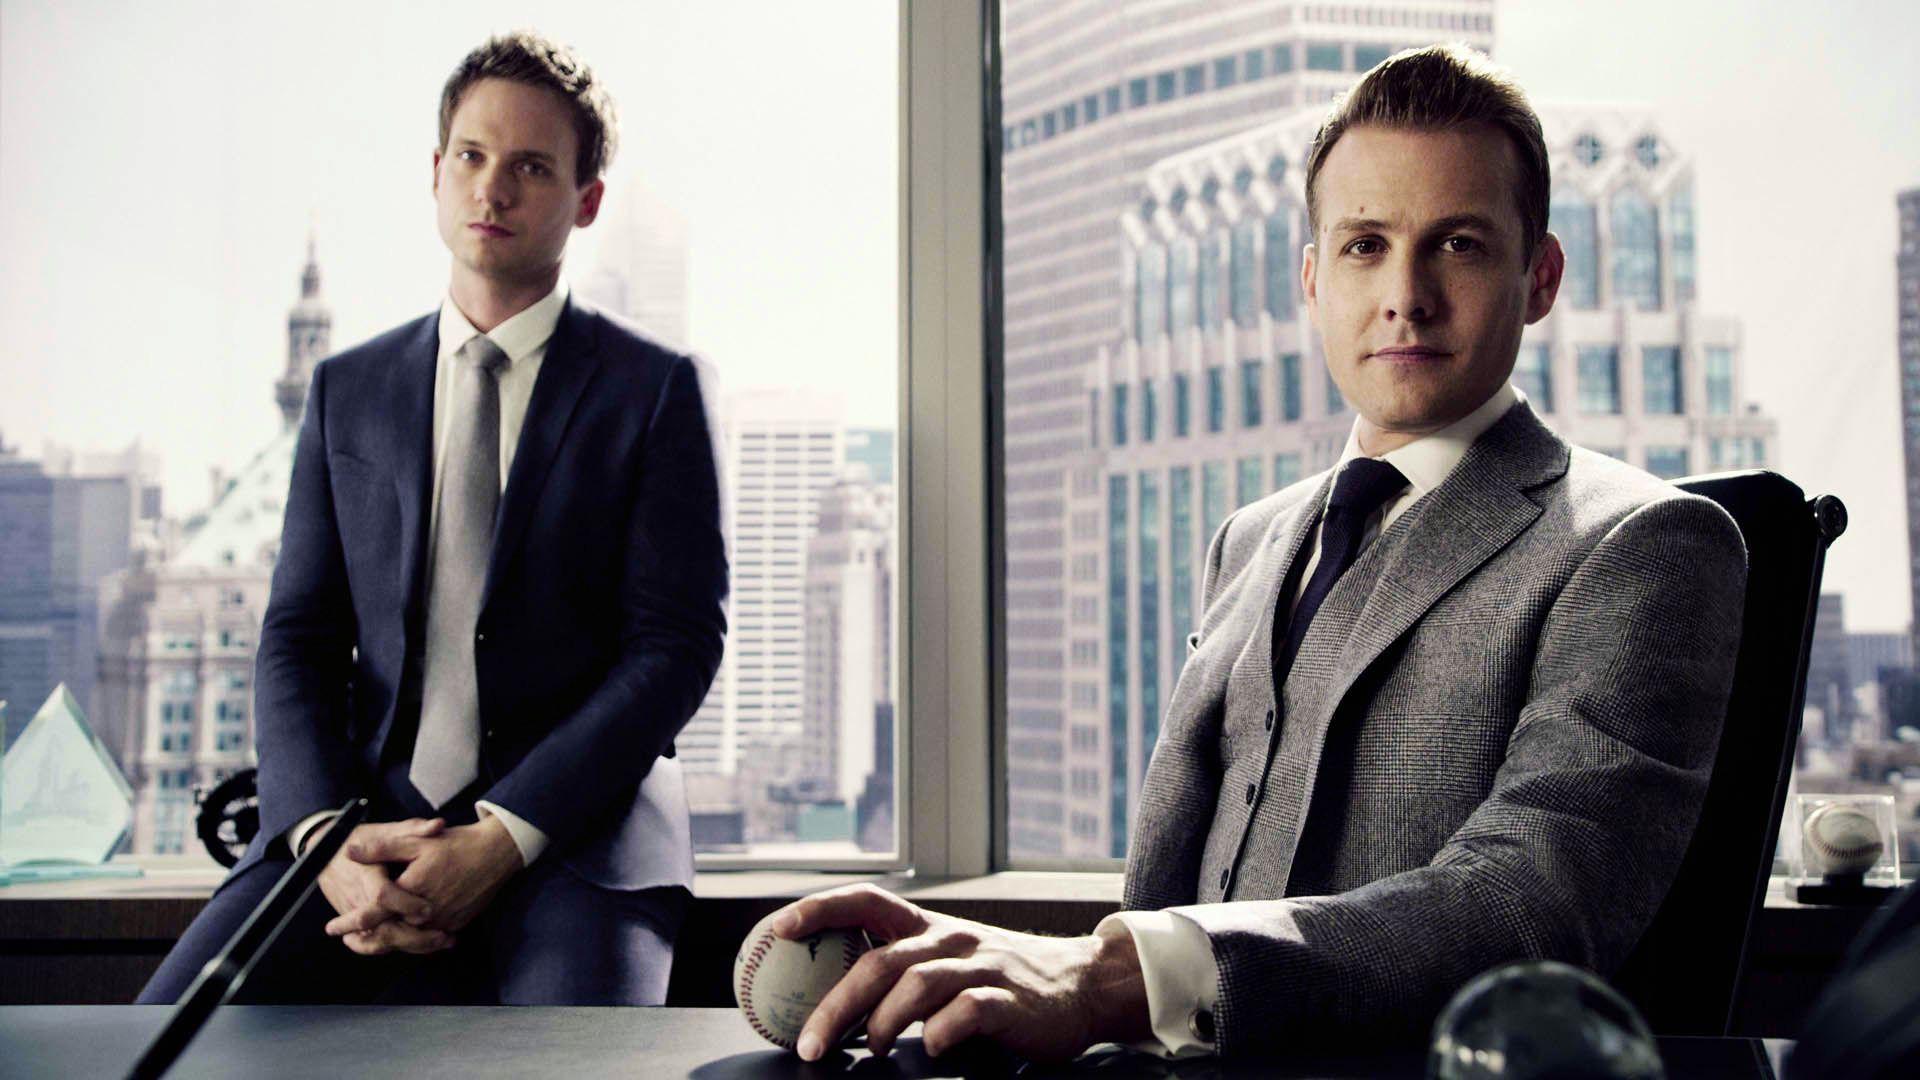 Suits Wallpaper, Gallery of 45 Suits Background, Wallpaper